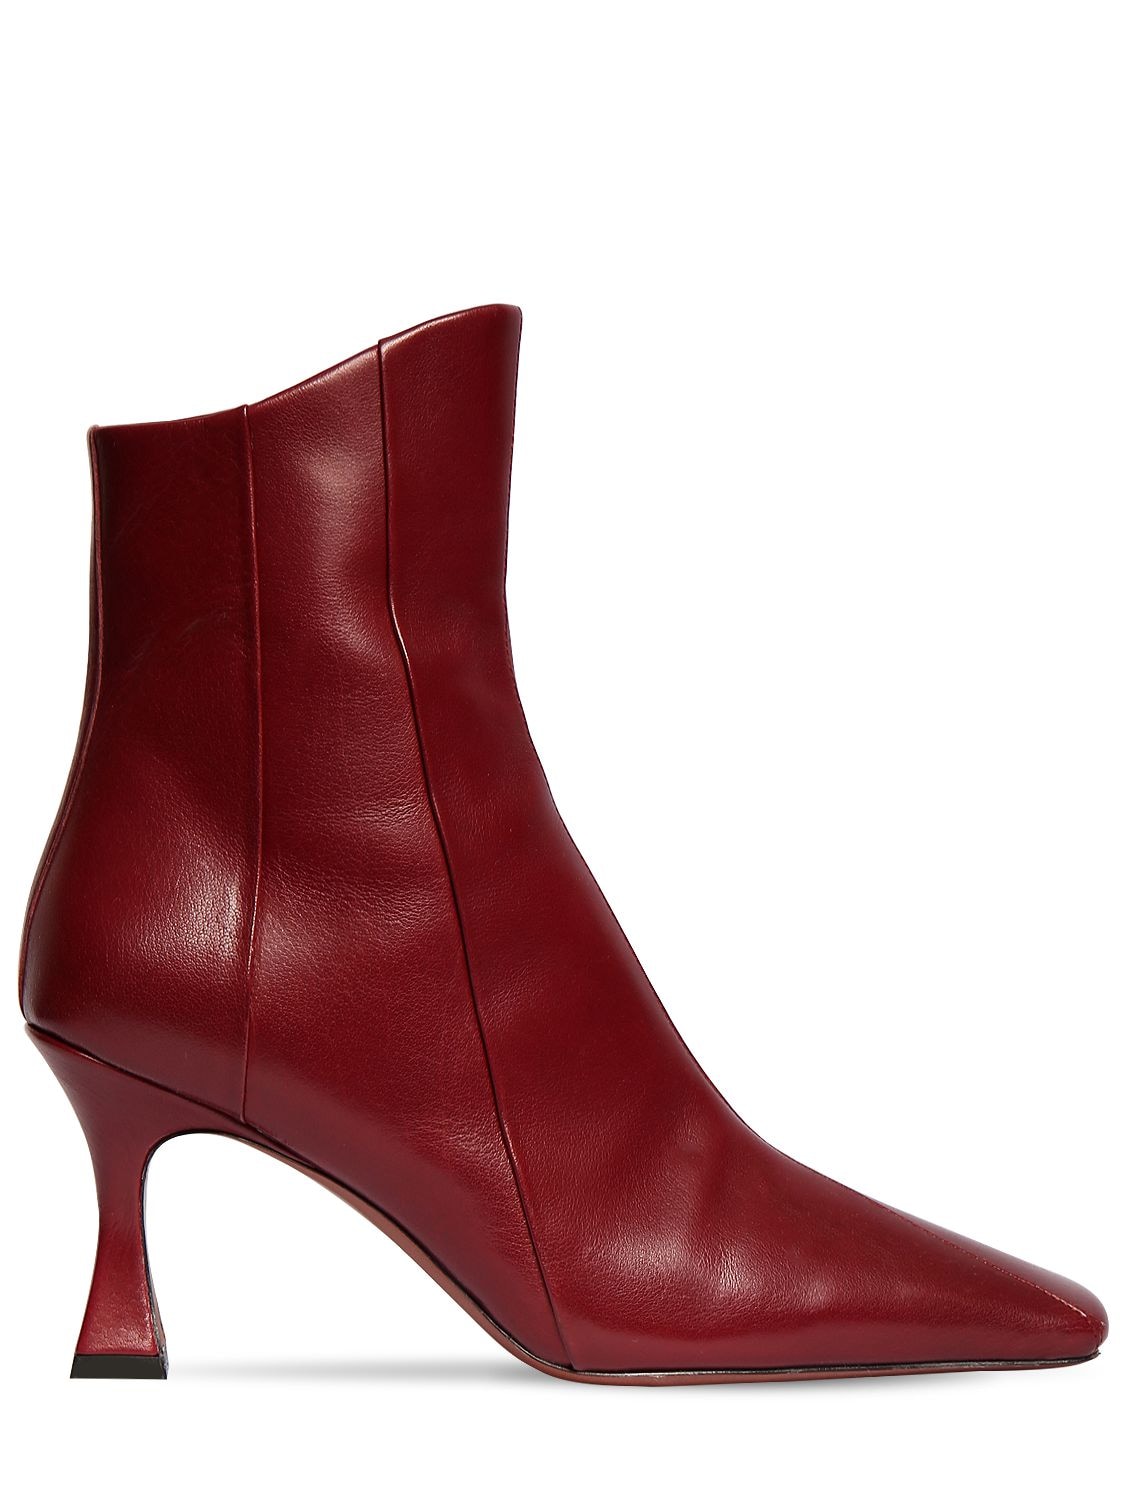 MANU ATELIER 80mm Xx Duck Leather Ankle Boots